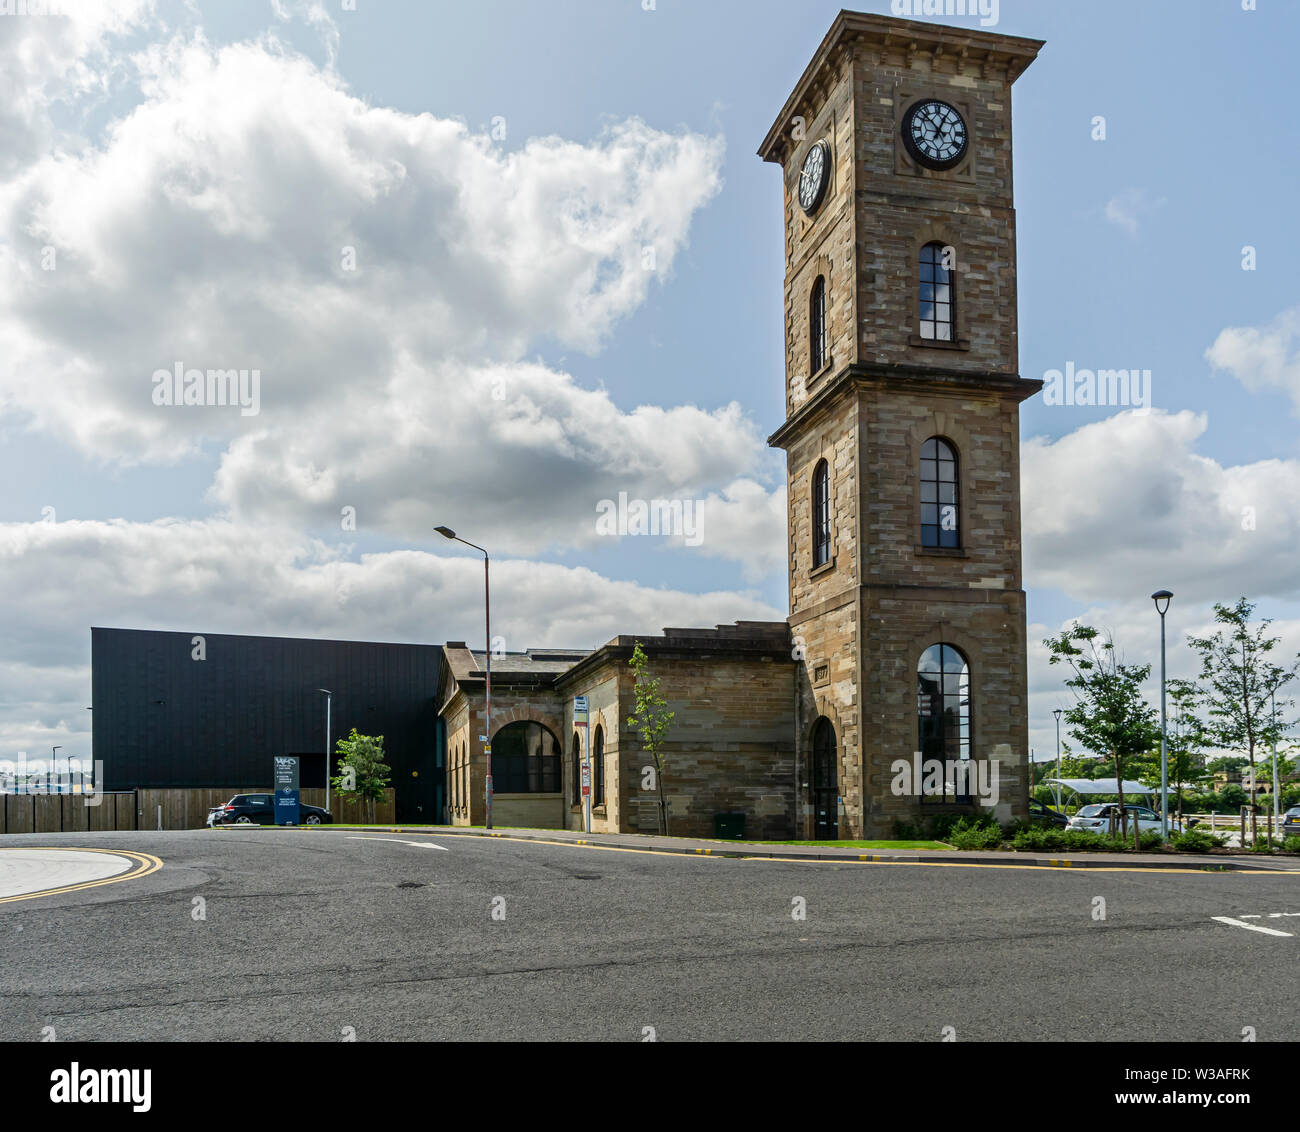 The Clydeside Distillery, The Old Pump House, Queen's Dock, Stobcross Road, Glasgow, Scotland, UK Stock Photo